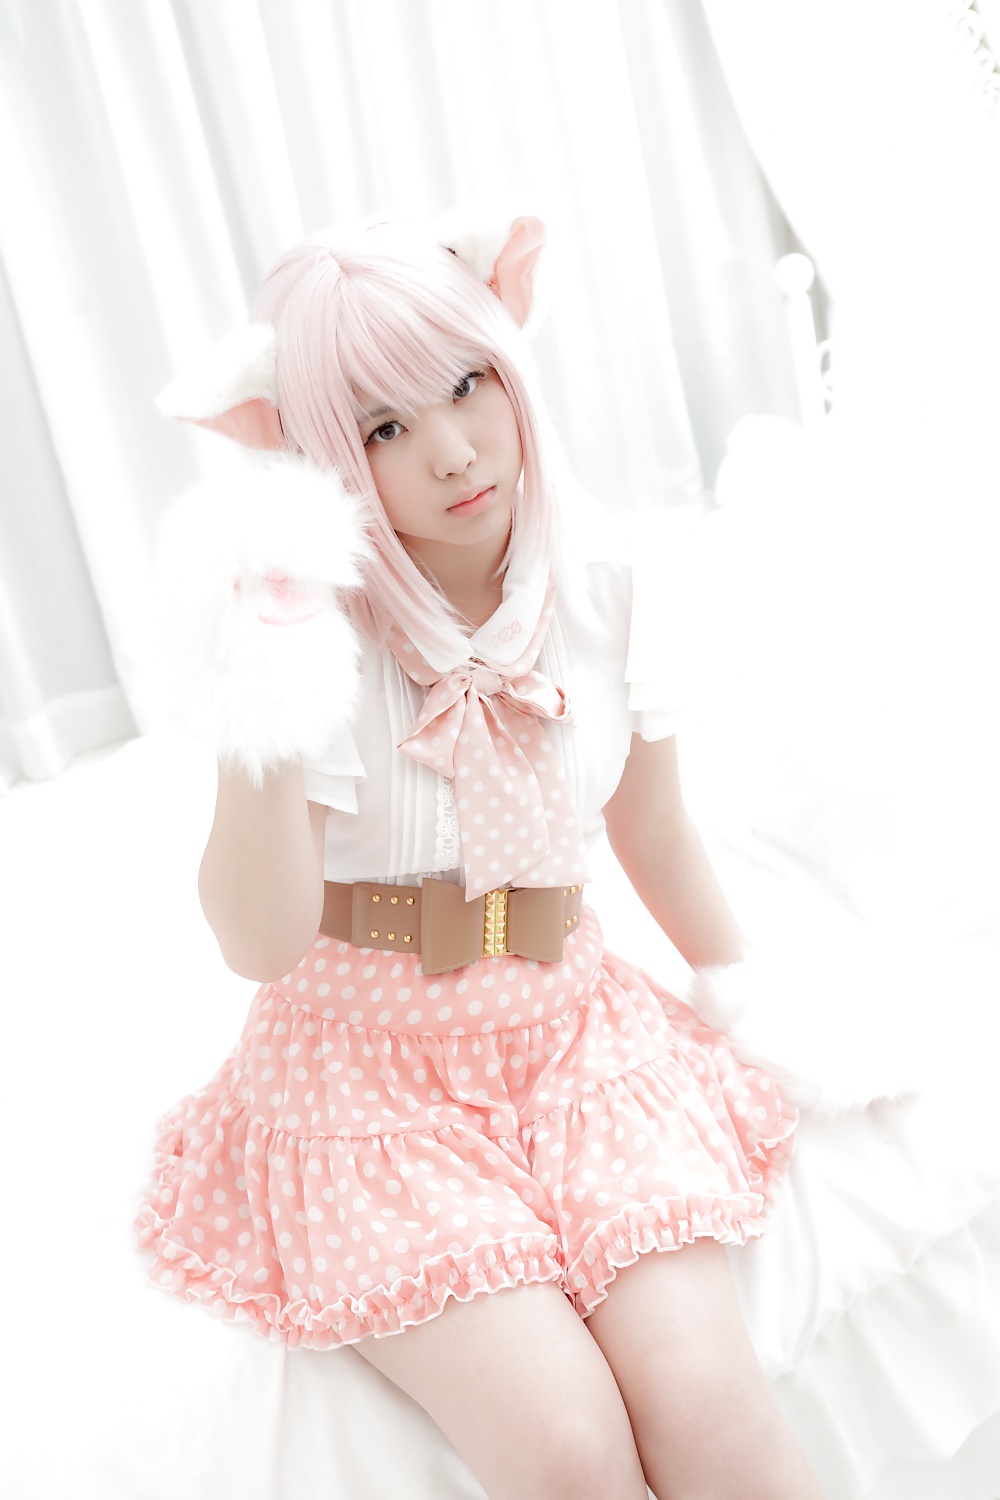 Asiatica cosplay in bianco
 #26558655